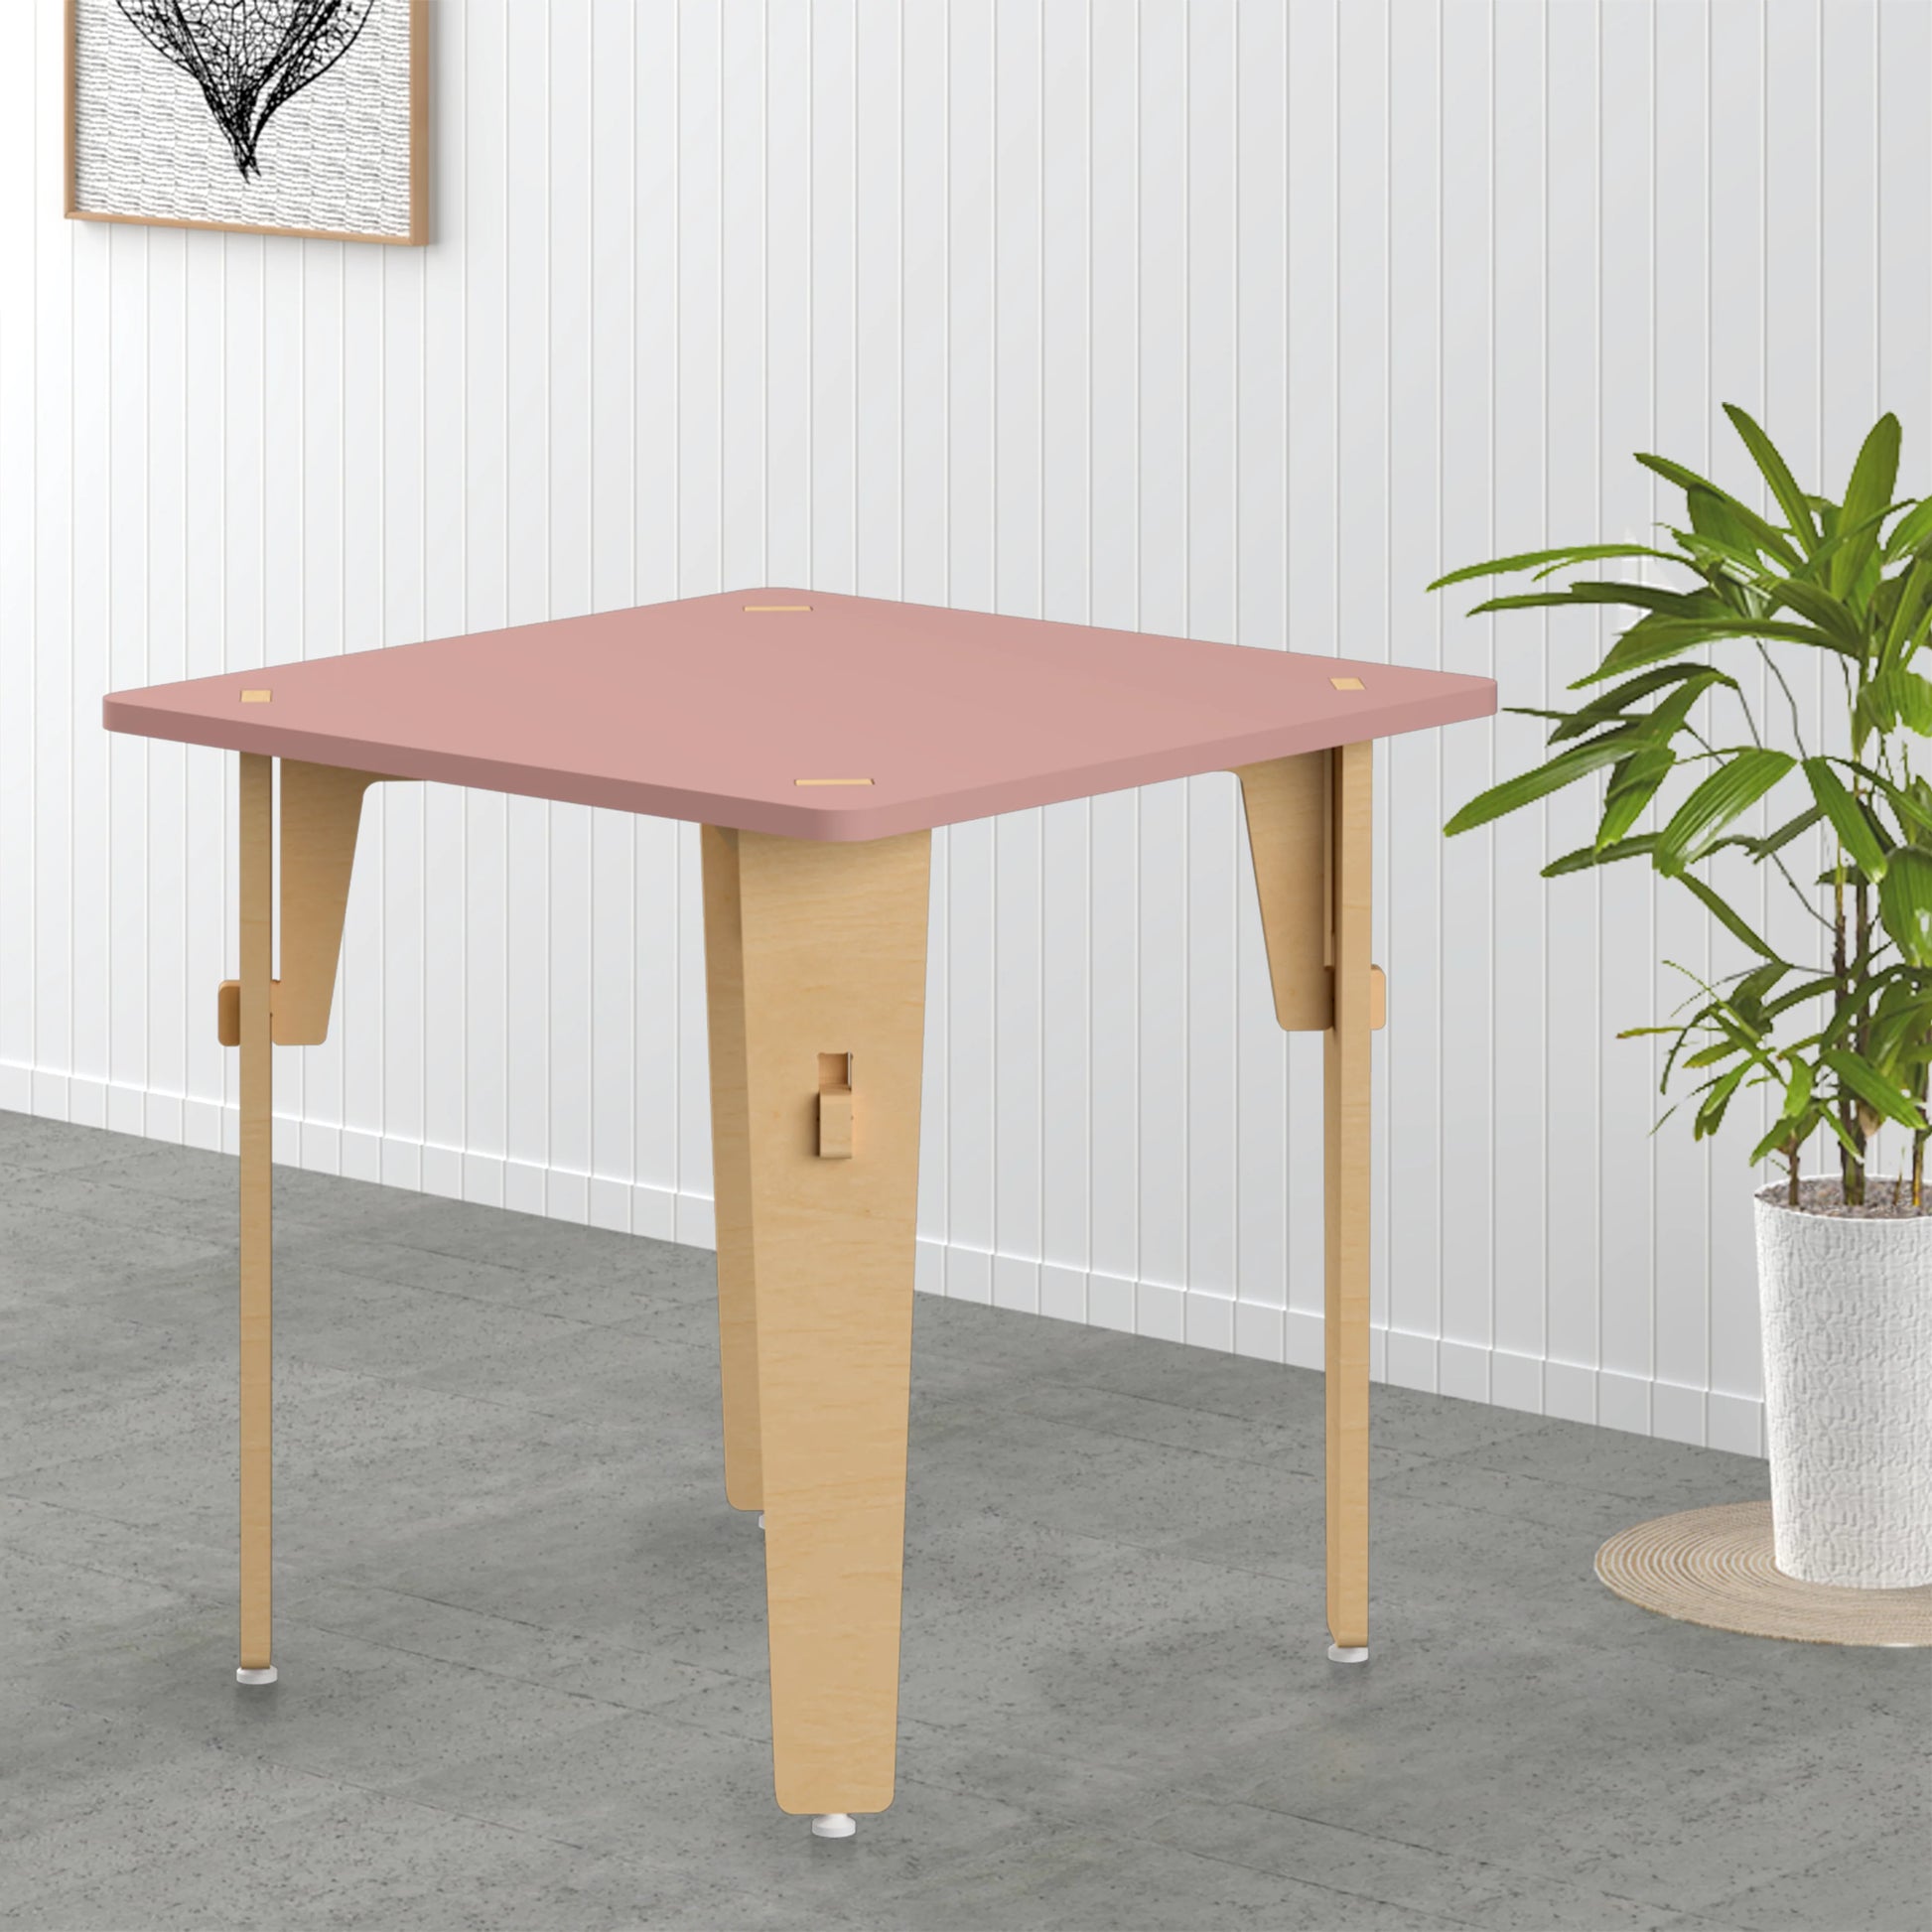 Buy Lime Fig Wooden Table - Pink (21 Inches) - Learning Furniture - SkilloToys.com